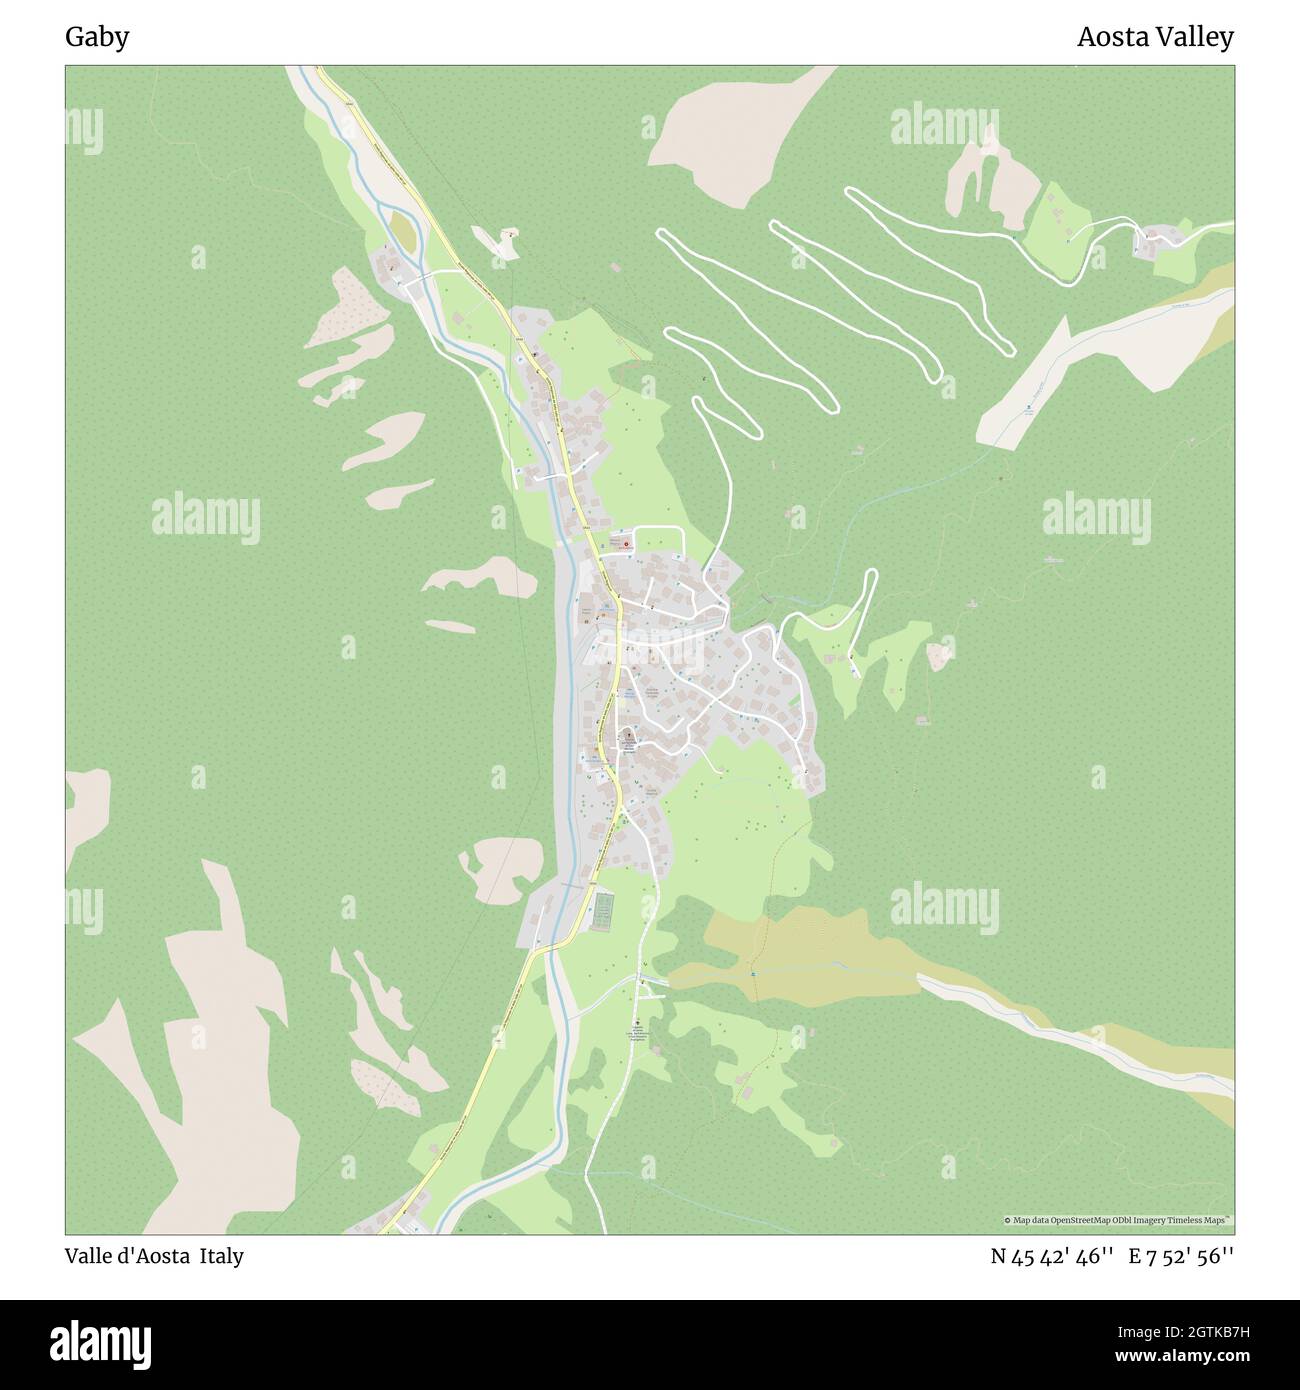 Gaby, Valle d'Aosta, Italy, Aosta Valley, N 45 42' 46'', E 7 52' 56'', map, Timeless Map published in 2021. Travelers, explorers and adventurers like Florence Nightingale, David Livingstone, Ernest Shackleton, Lewis and Clark and Sherlock Holmes relied on maps to plan travels to the world's most remote corners, Timeless Maps is mapping most locations on the globe, showing the achievement of great dreams Stock Photo